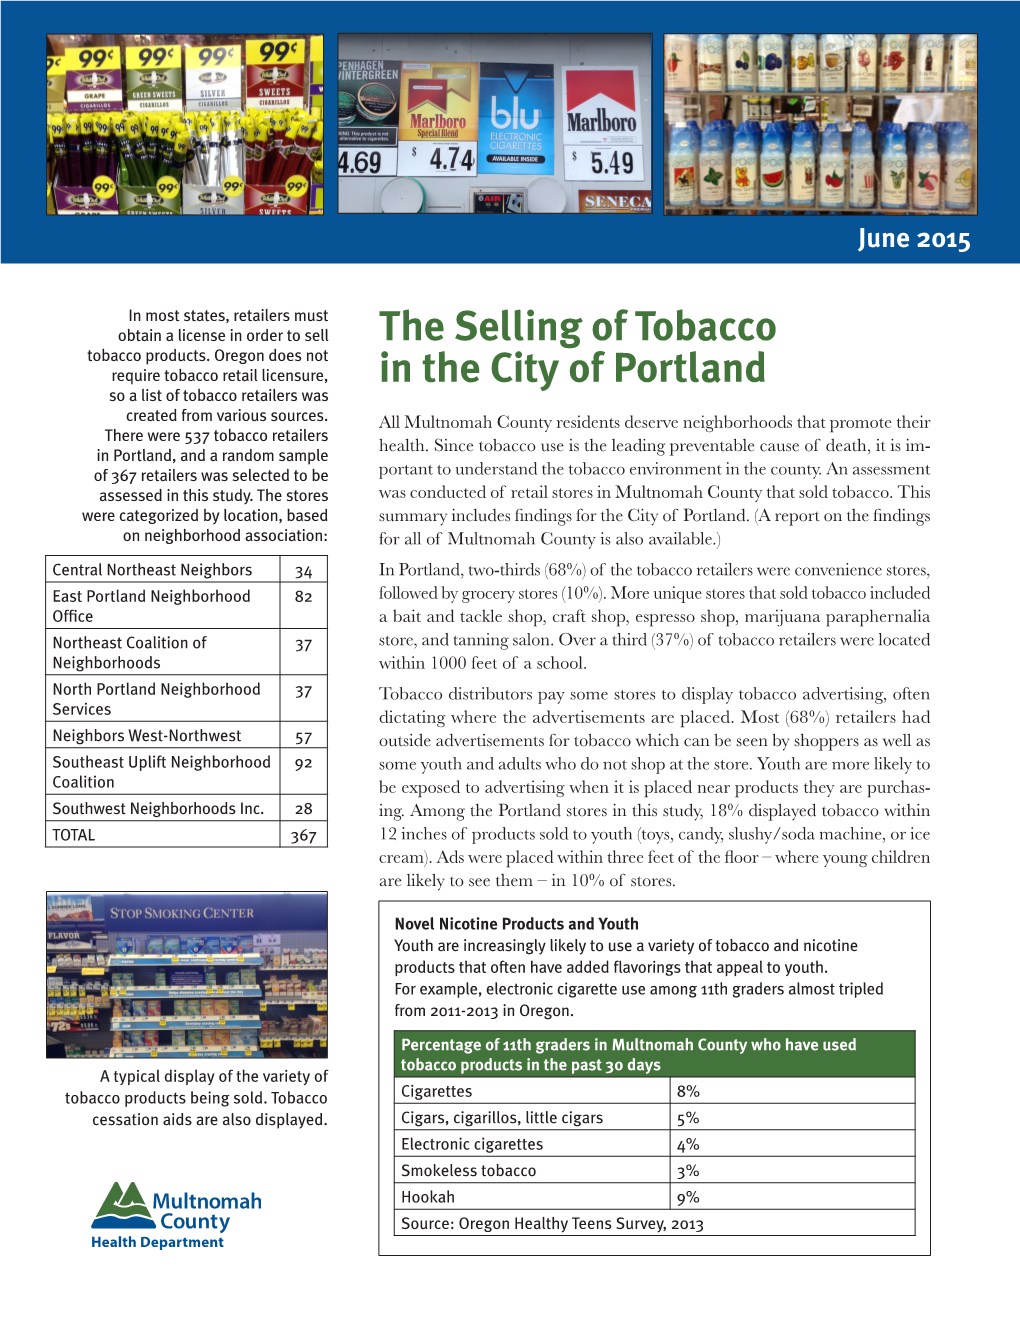 The Selling of Tobacco in the City of Portland